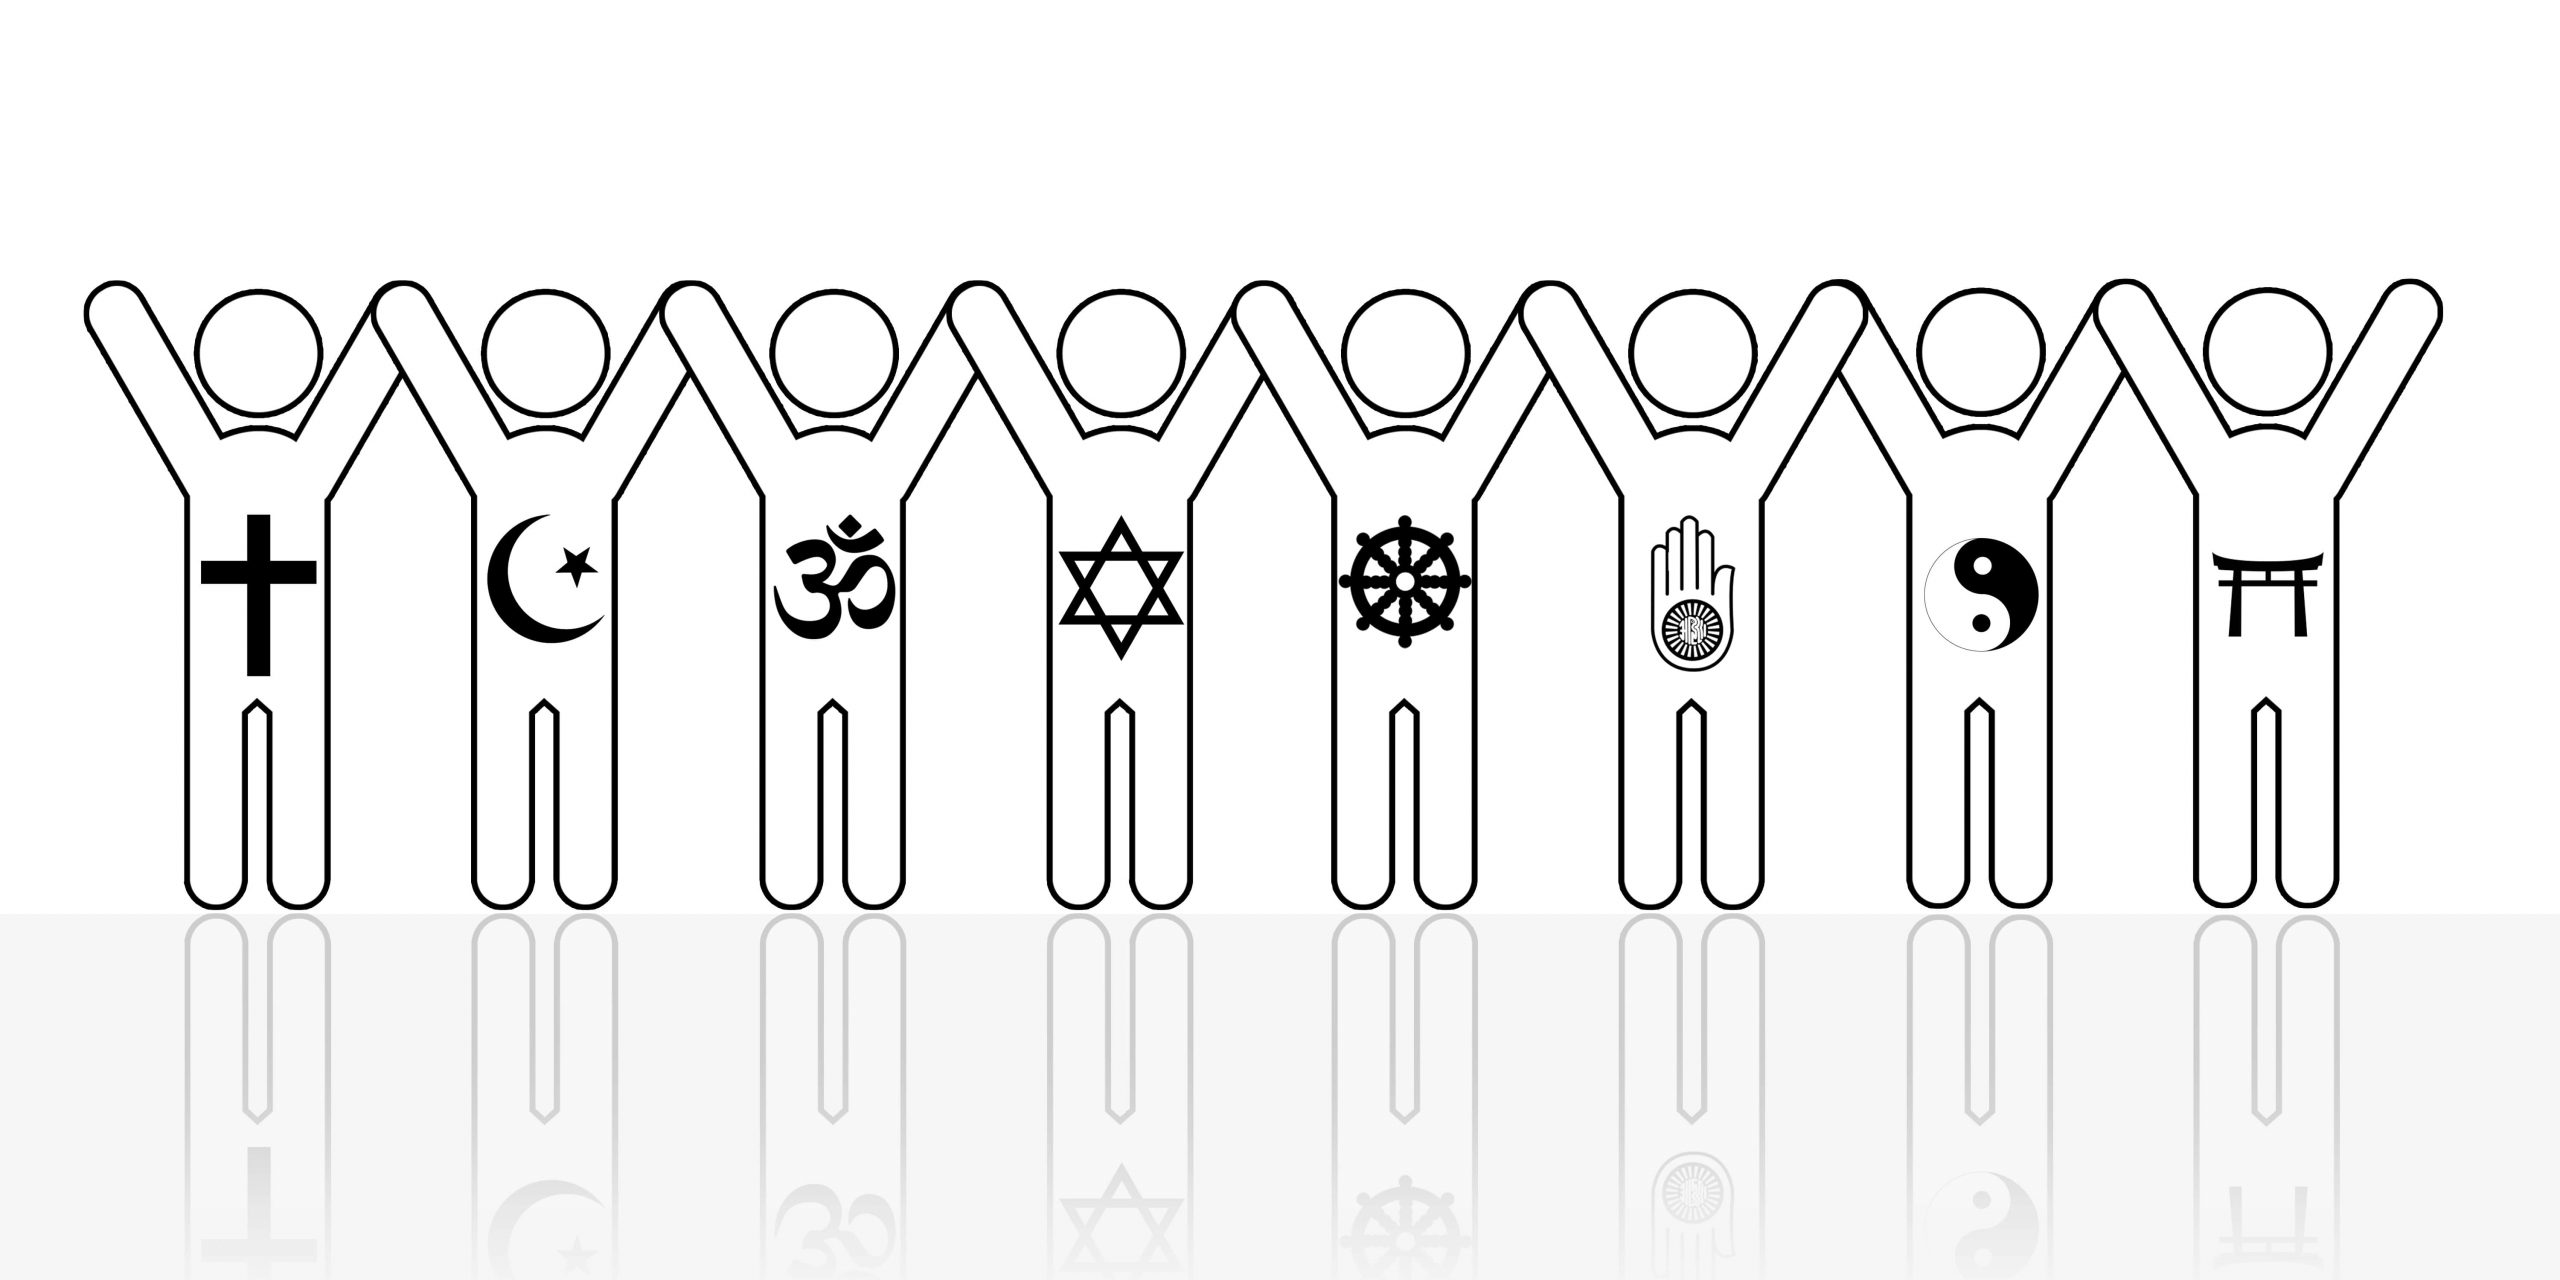 Outlines of 8 people each with a different religion associated to them